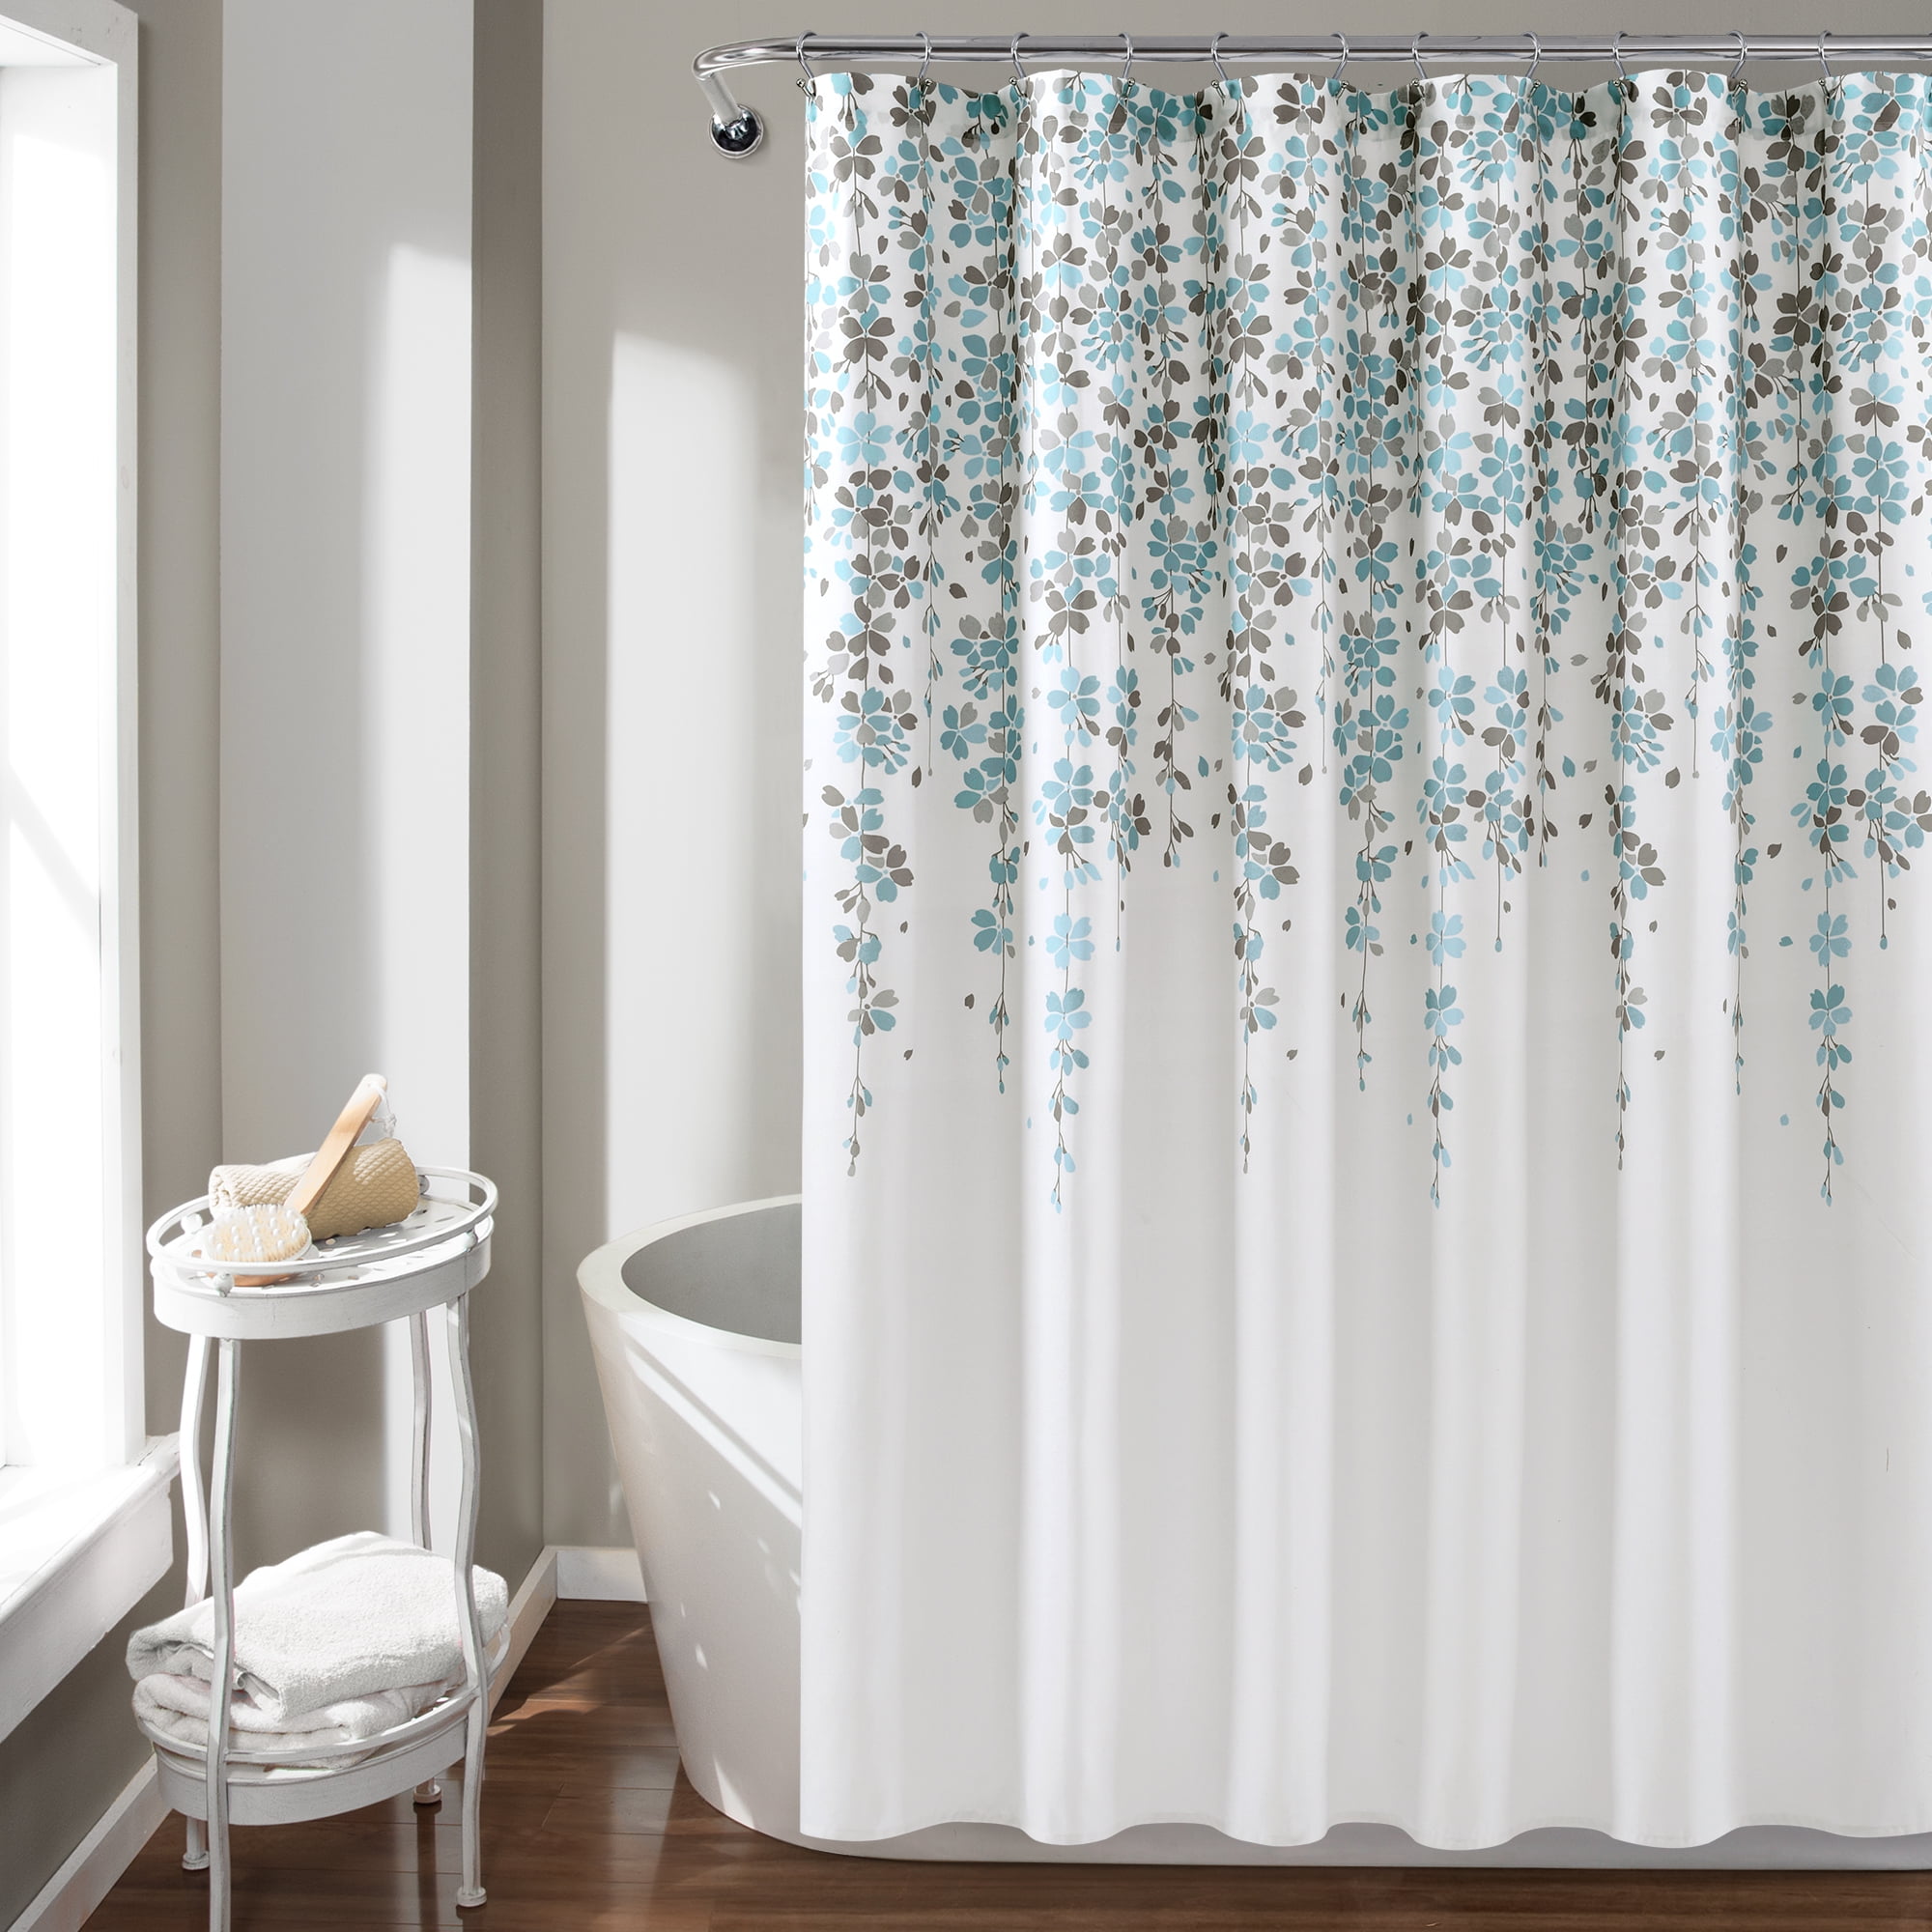 Colored Dragonfly Shower Curtain Bathroom Decor Waterproof Fabric 71*71in 